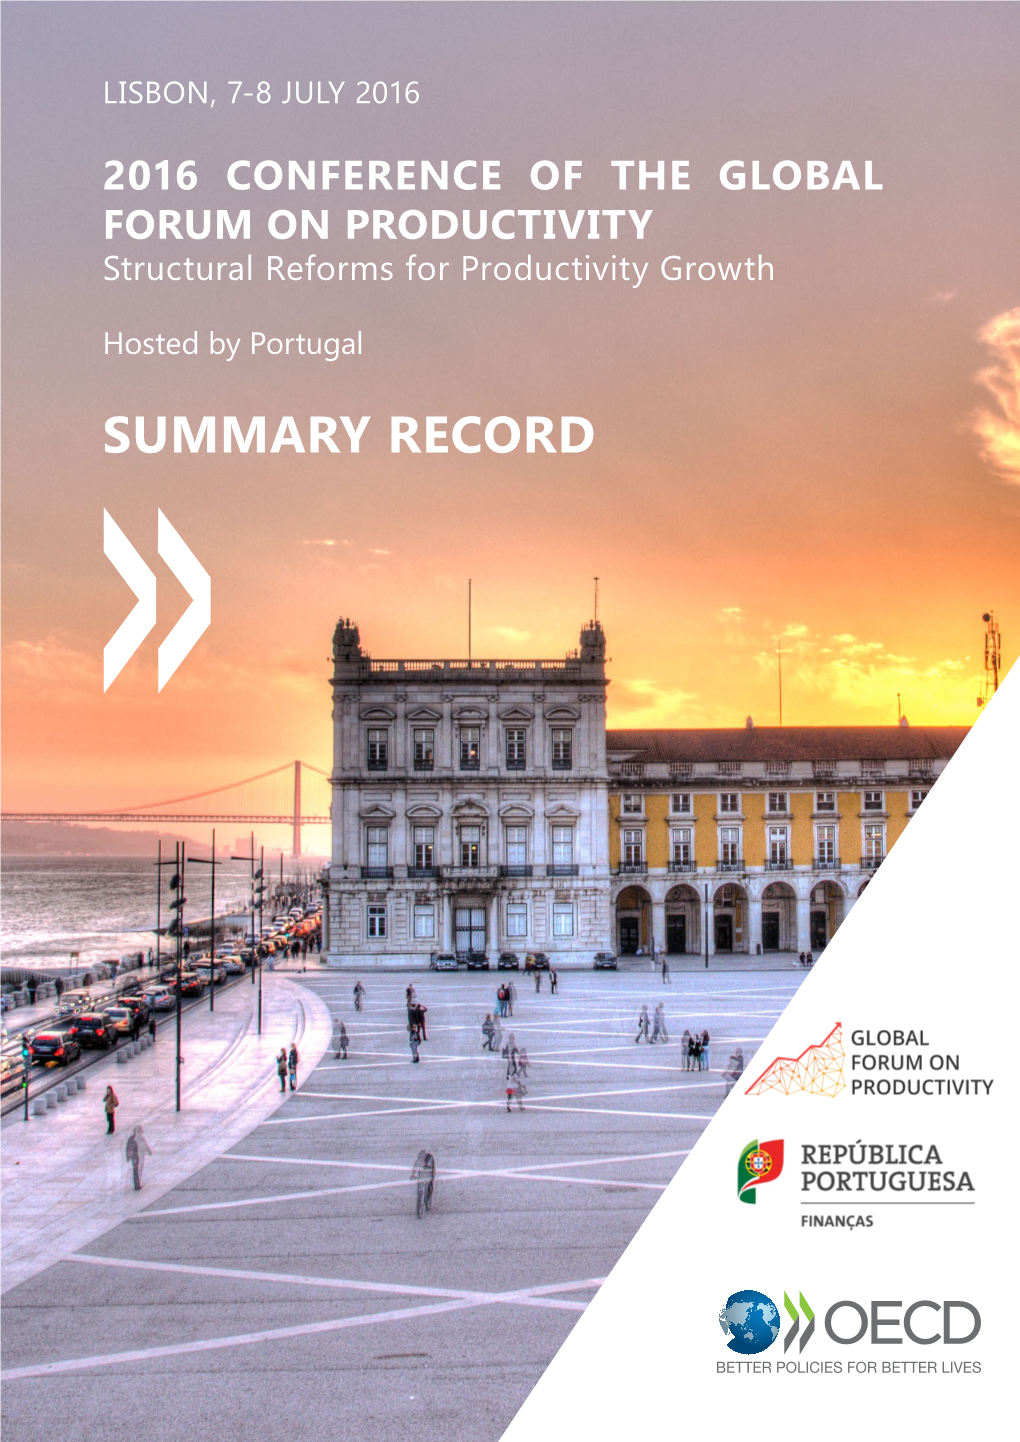 SUMMARY RECORD Summary of the 2016 Conference of the Global Forum on Productivity (Lisbon, 7-8 July 2016)